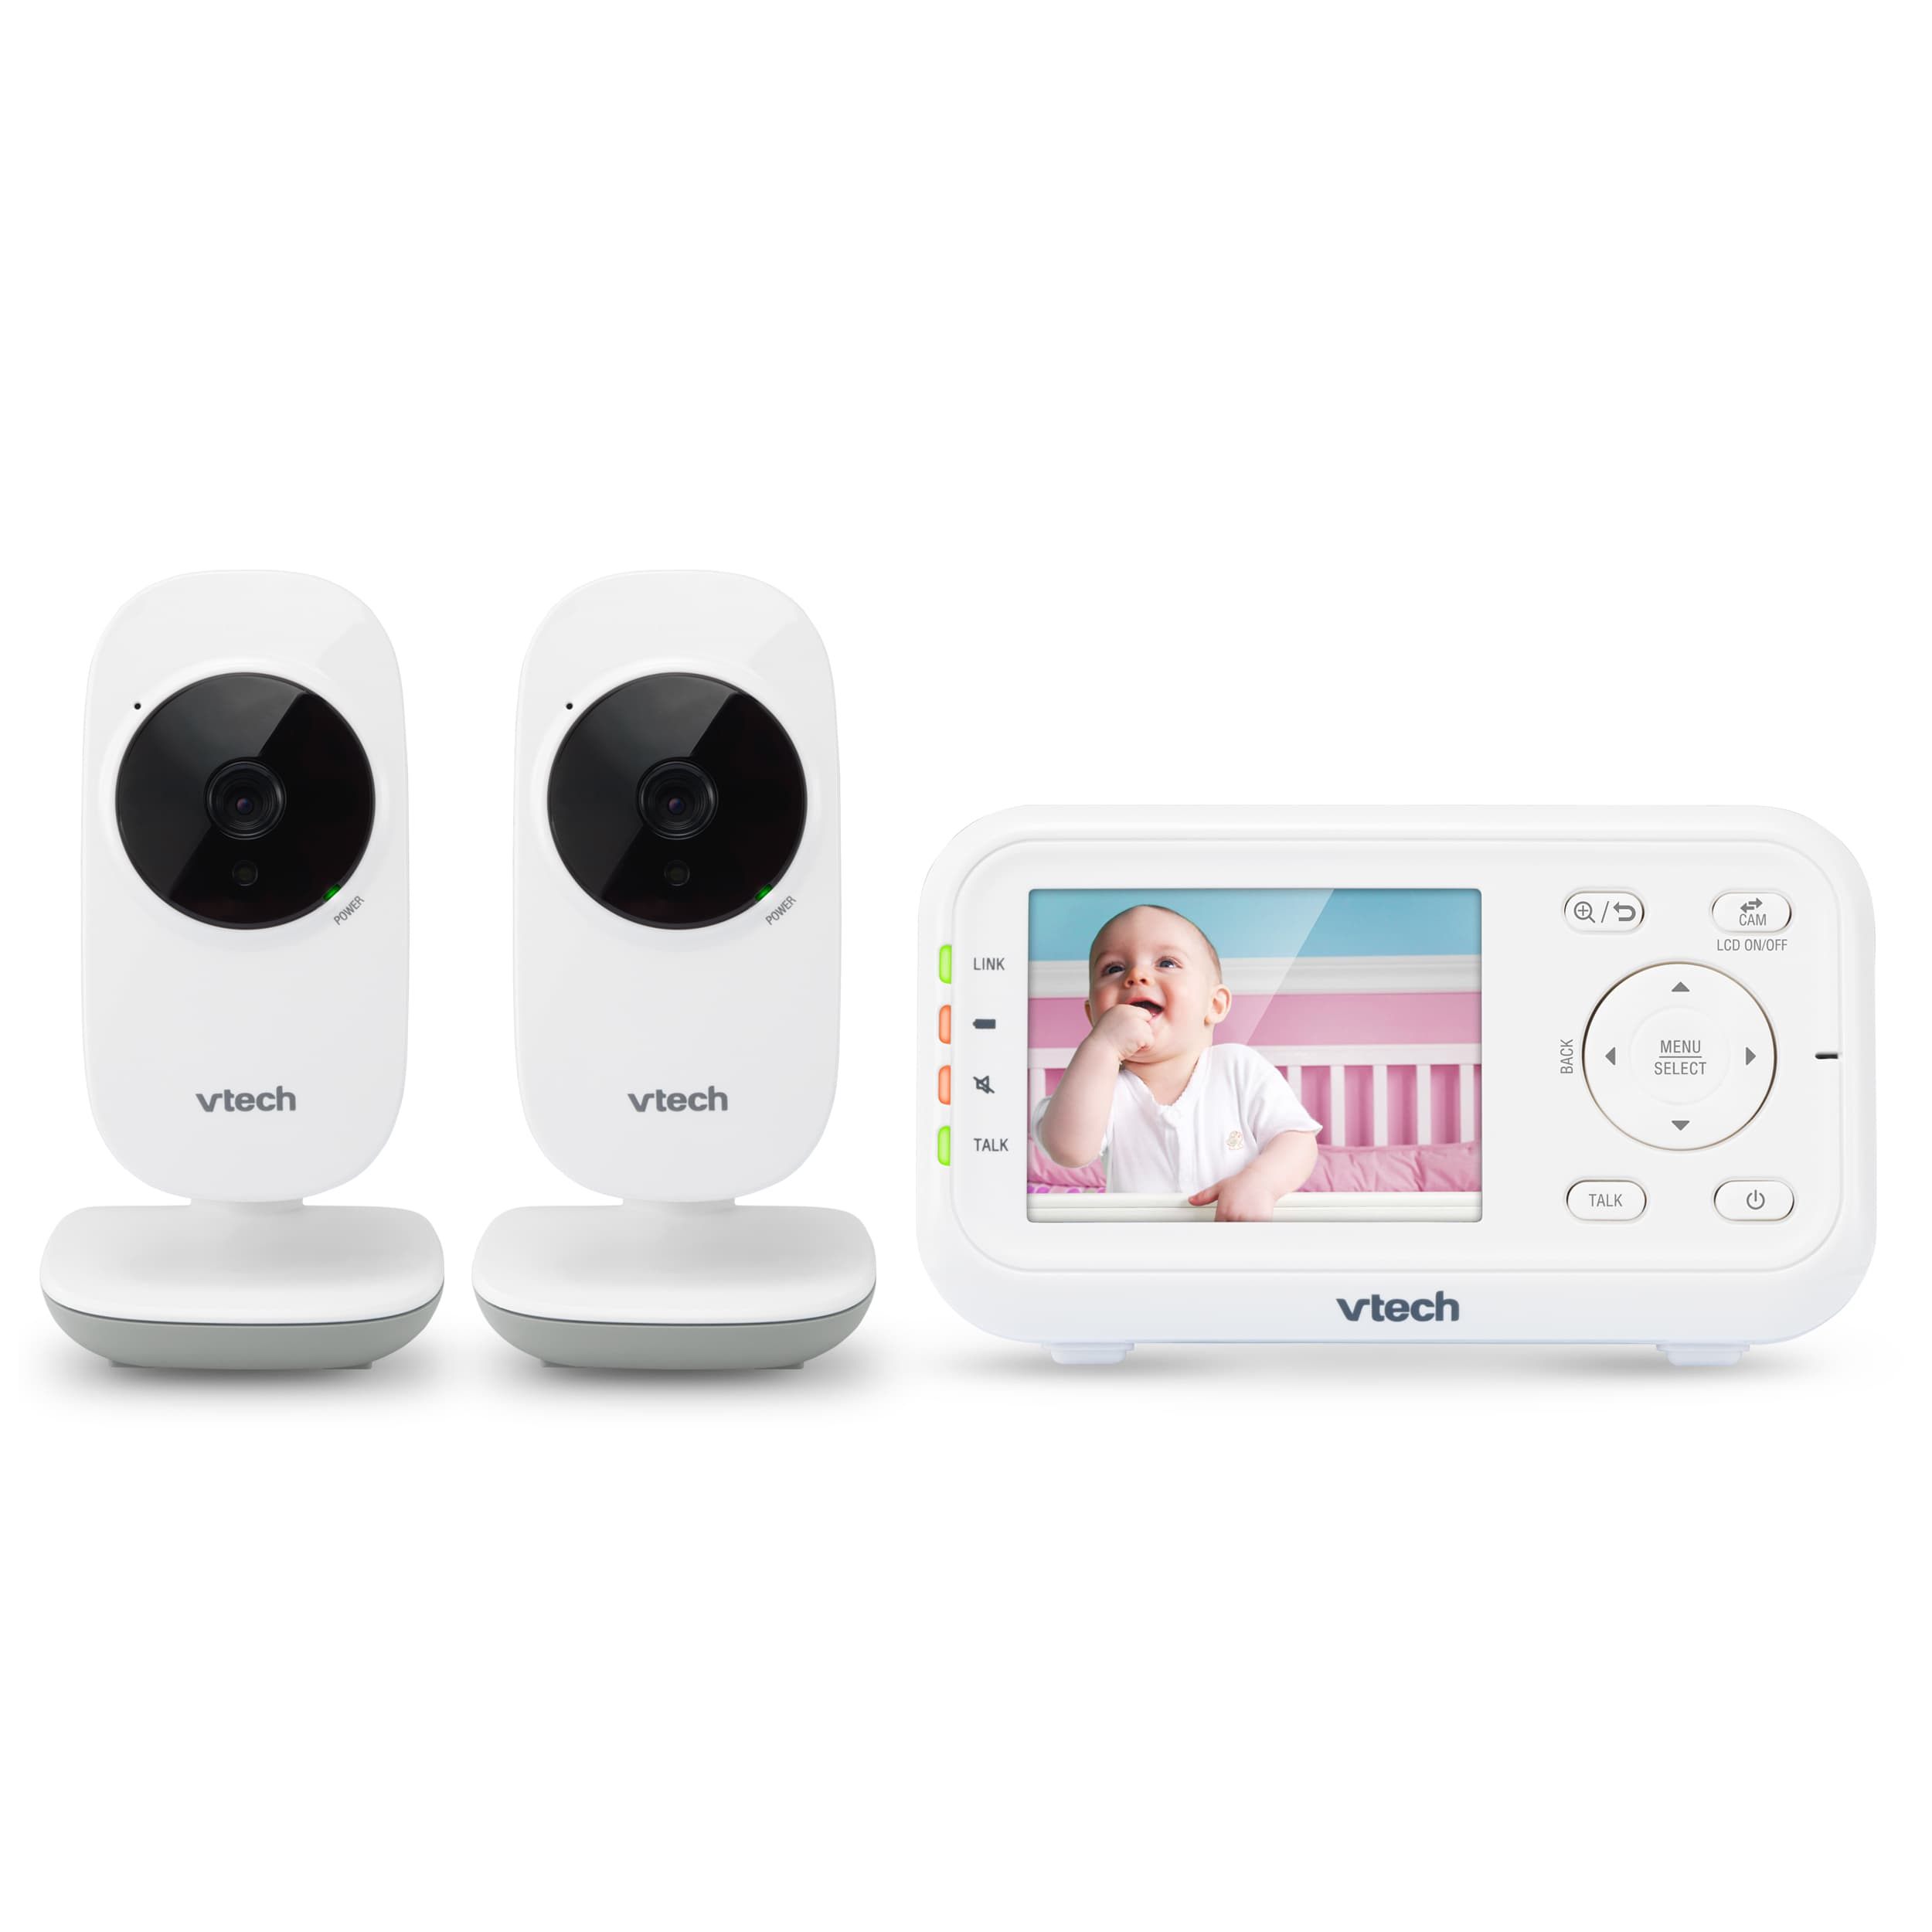 Lit Bebe 9 Meilleur De 2 8" Digital Video Baby Monitor with 2 Cameras and Automatic Night